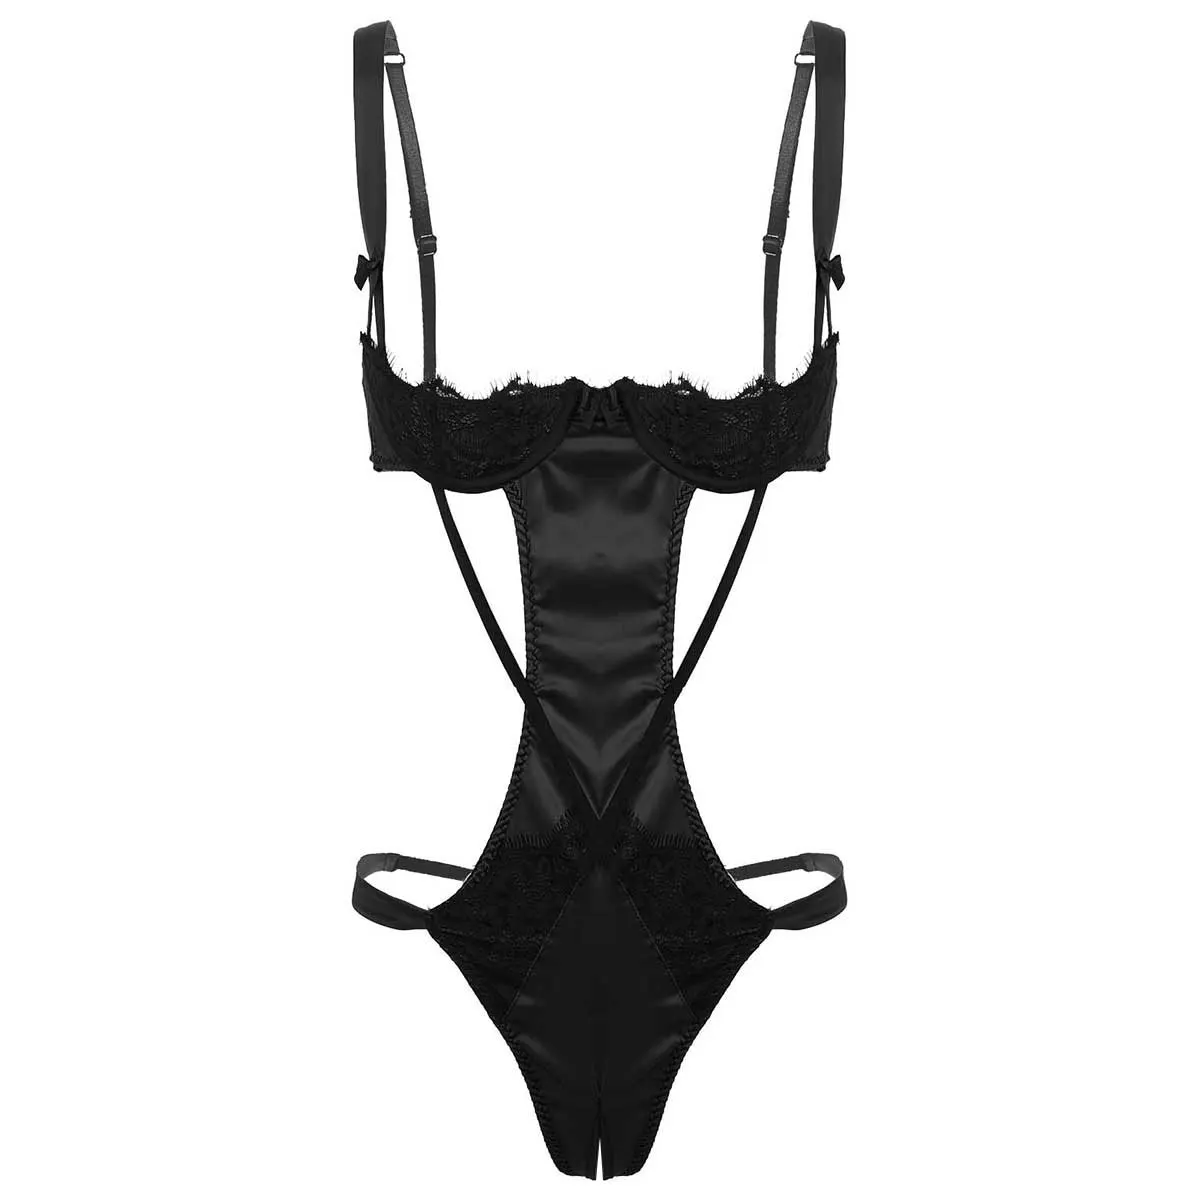 

Womens One-piece Erotic Lingerie Open Cup Underwired Push Up Bra Costume Underwear Thong Backless and Crotchless Teddy Bodysuit